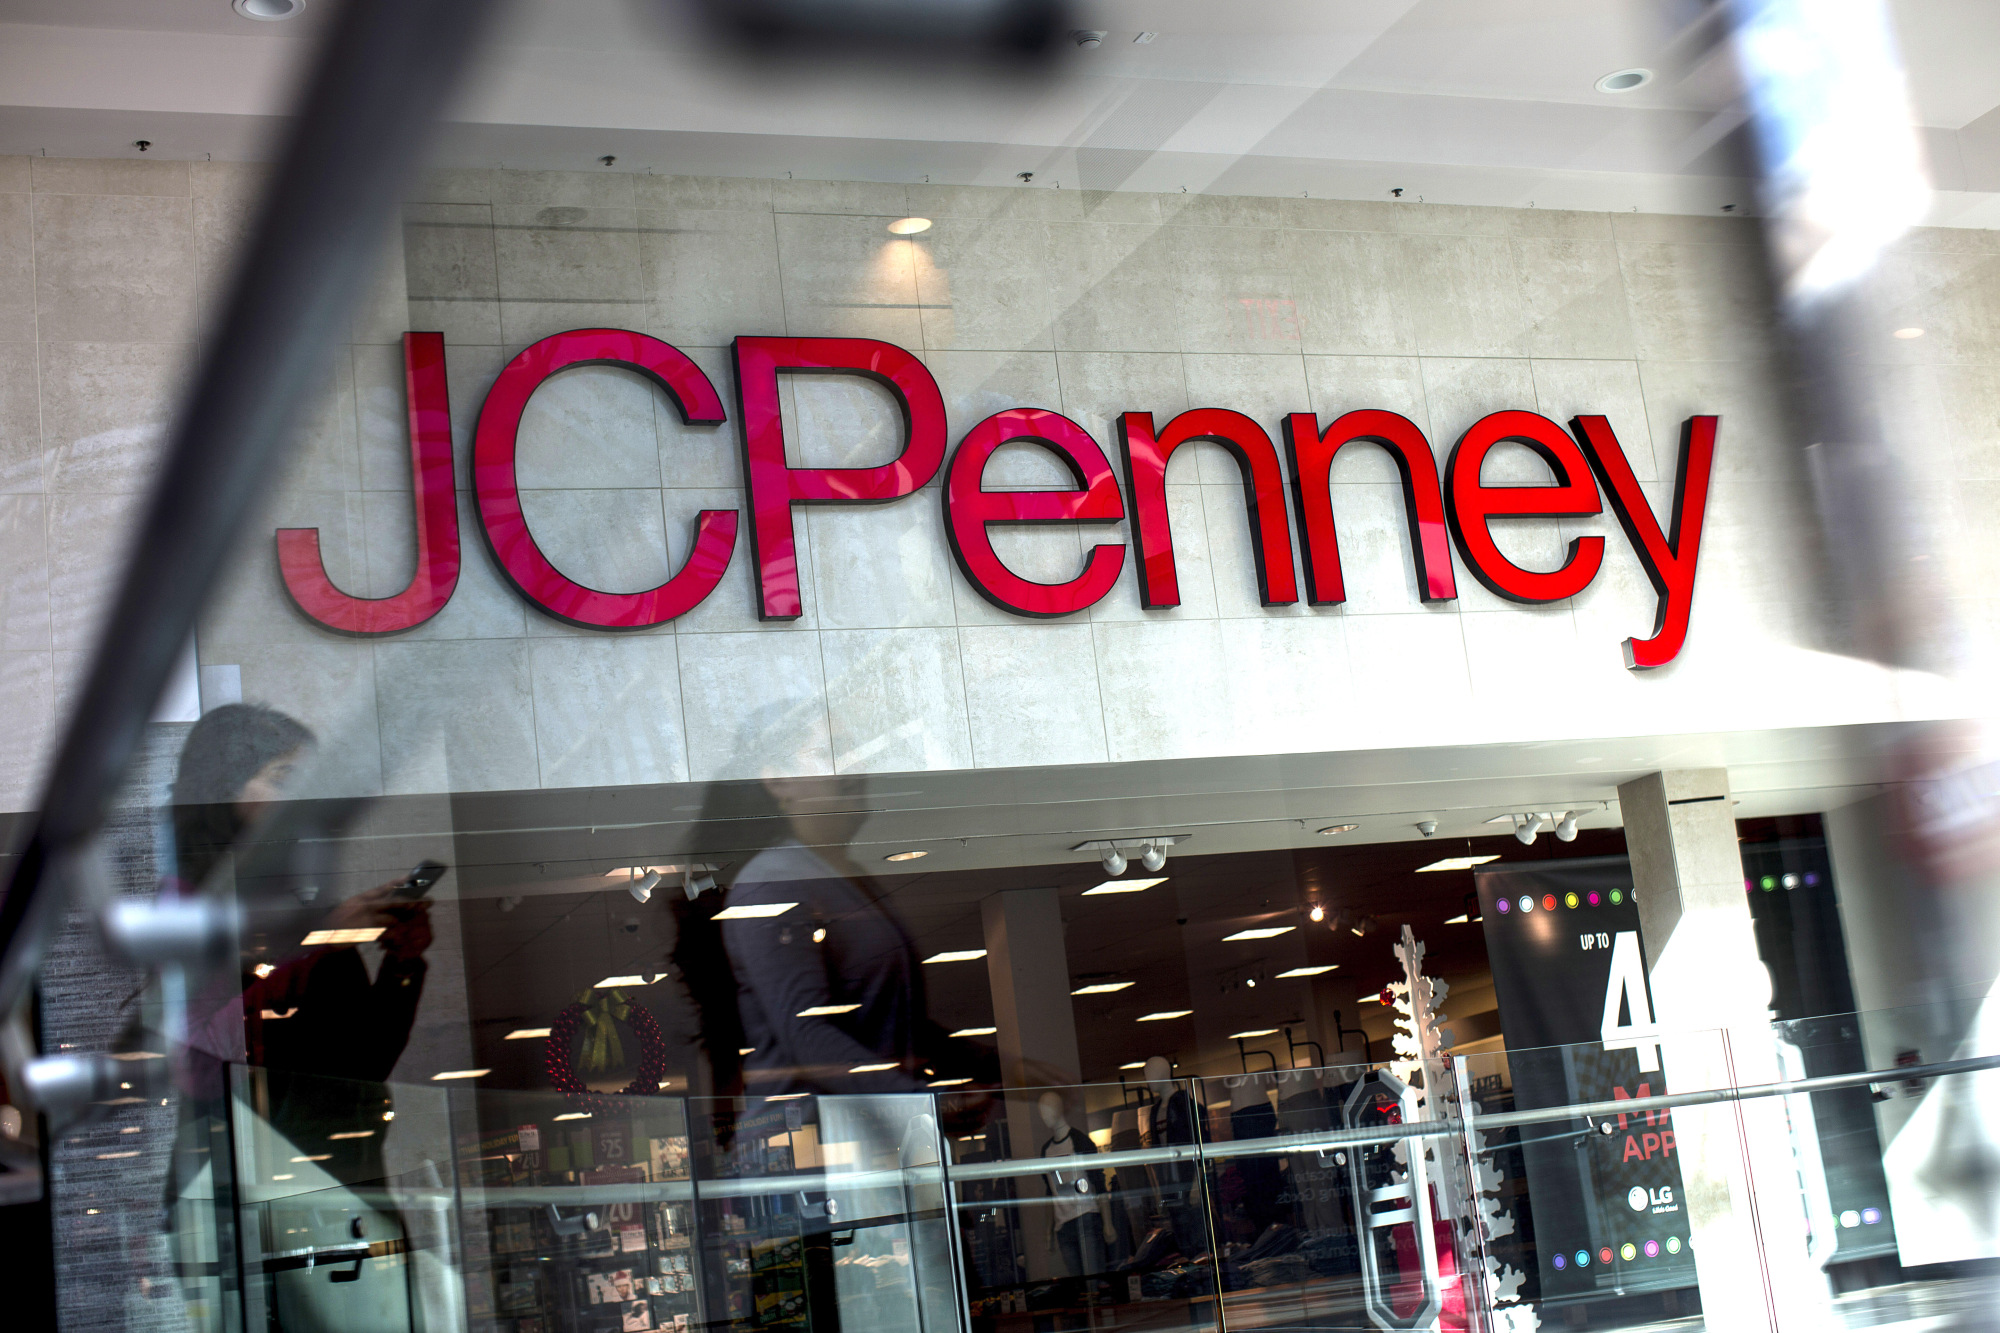 A penny for Penney: J.C. Penney launches 1-cent deals